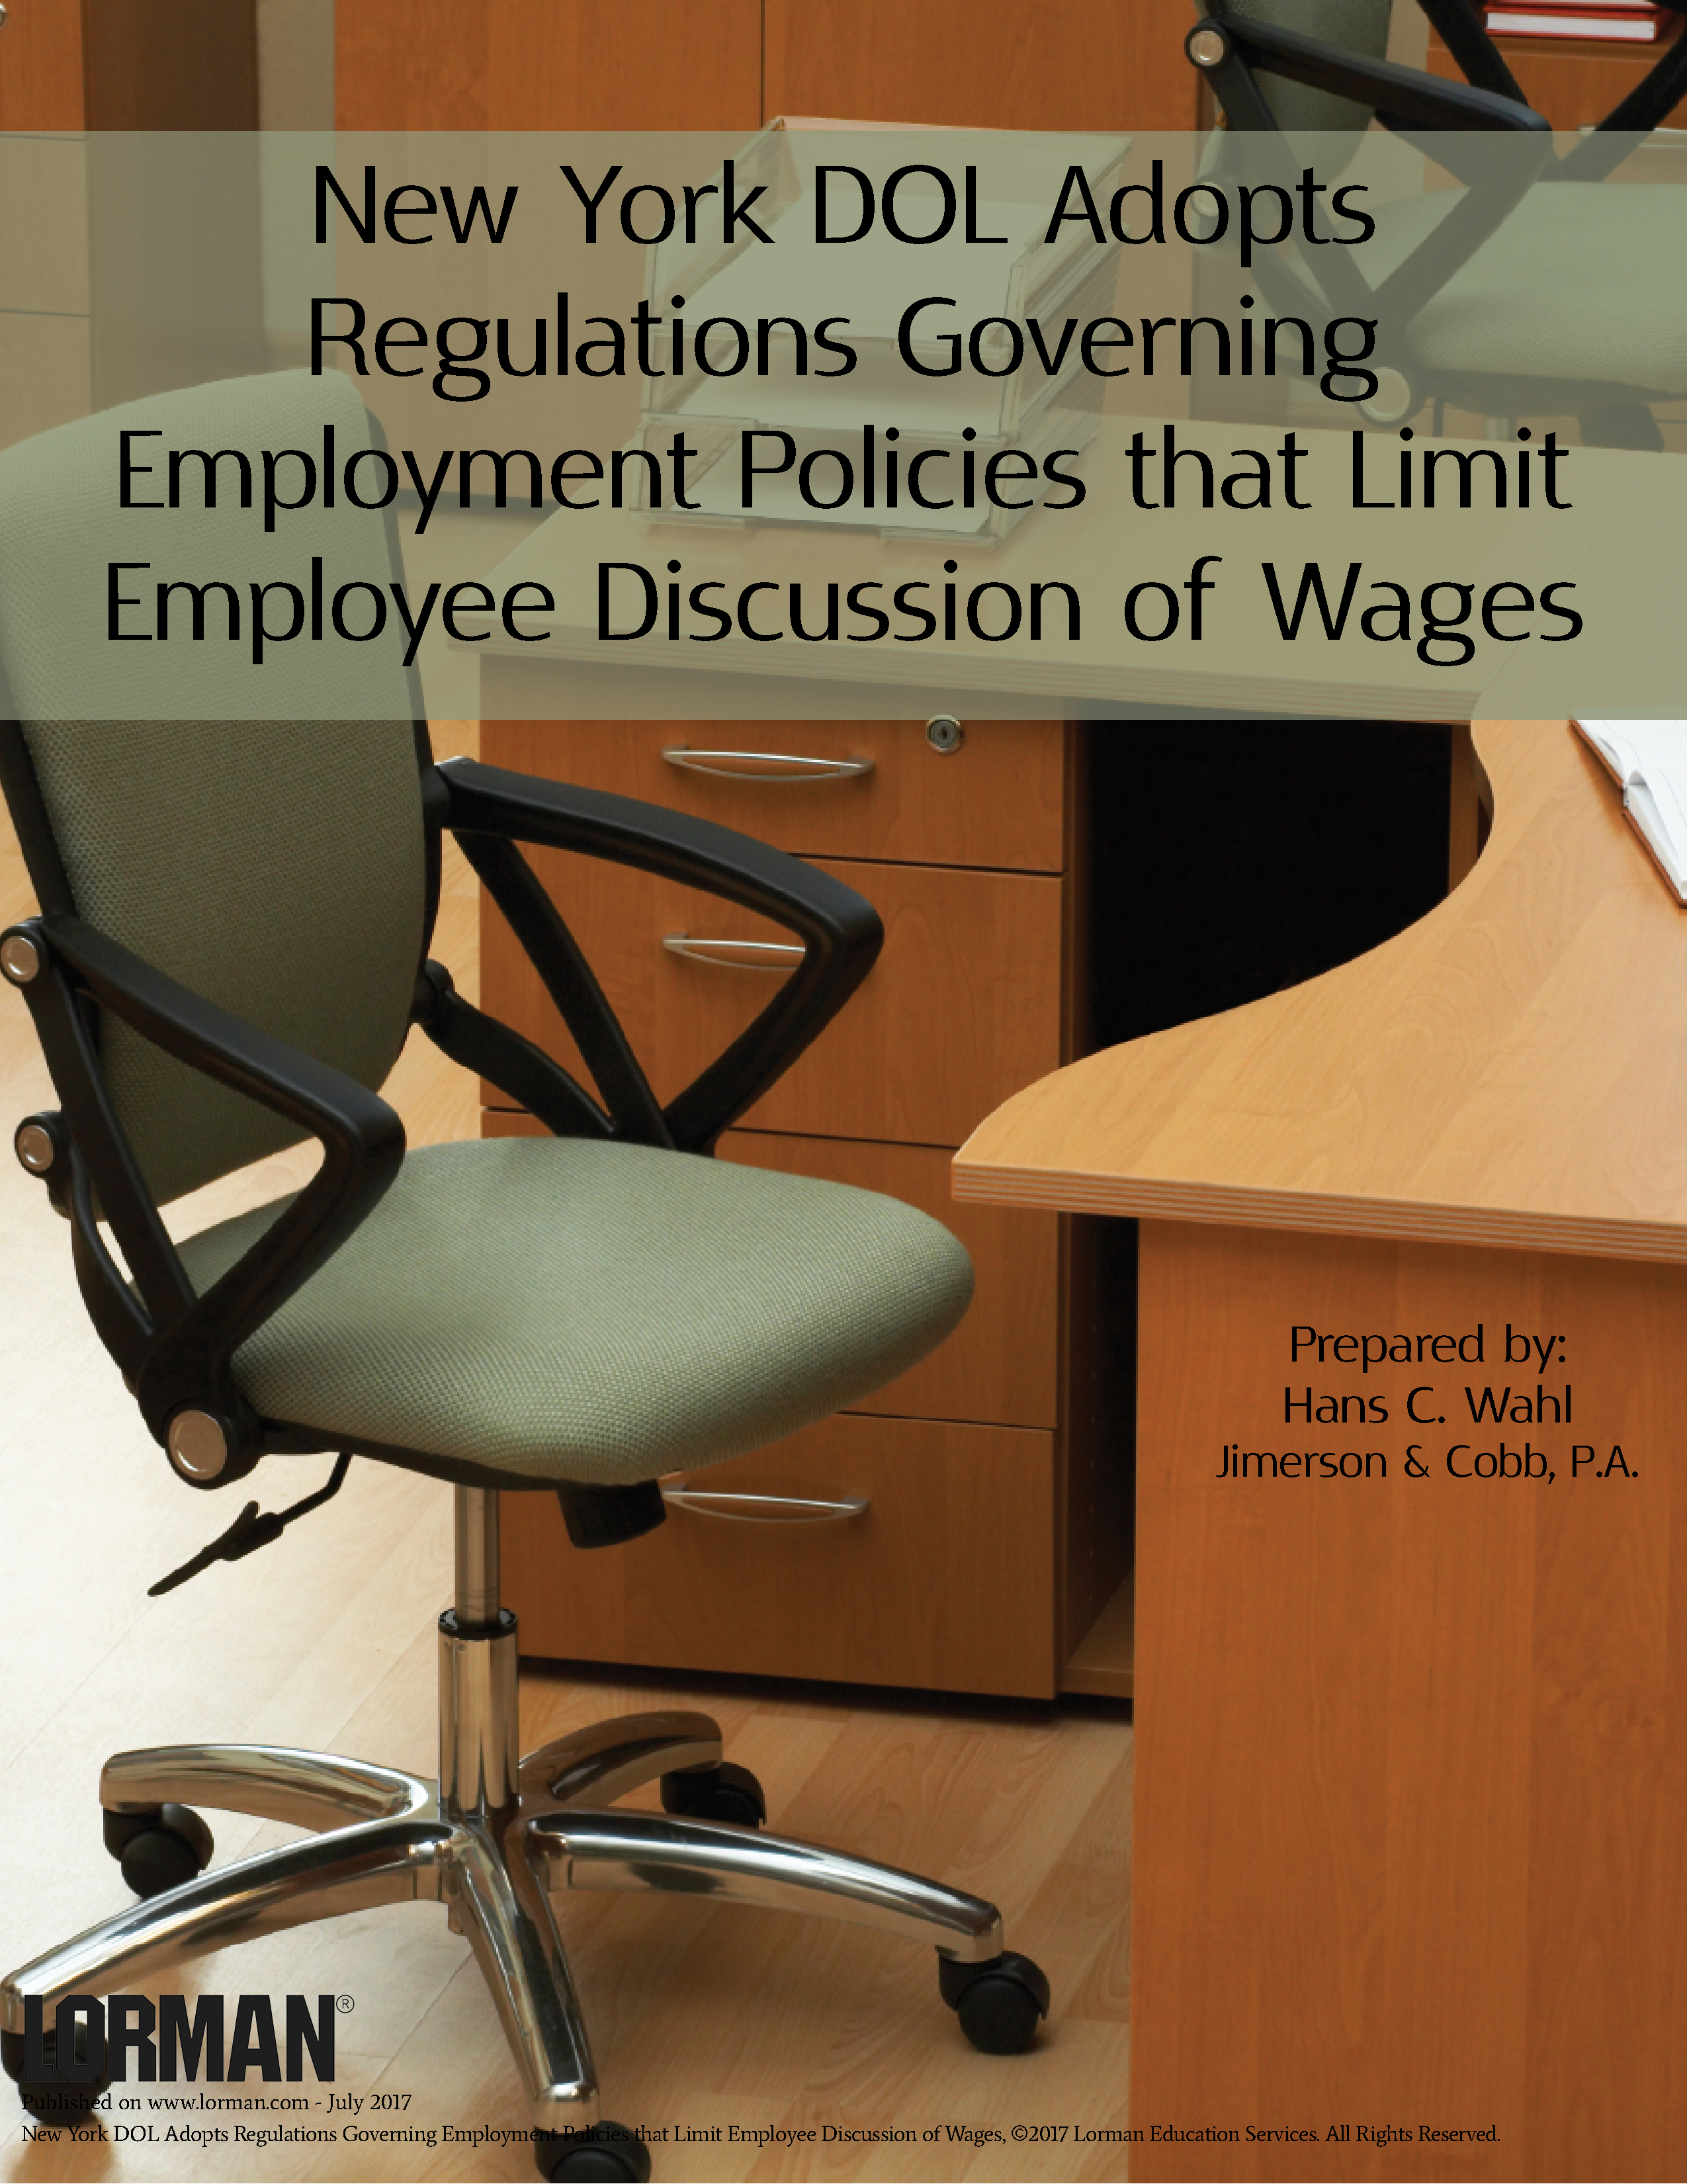 New York DOL Adopts Regulations Governing Employment Policies that Limit Employee Wage Discussion